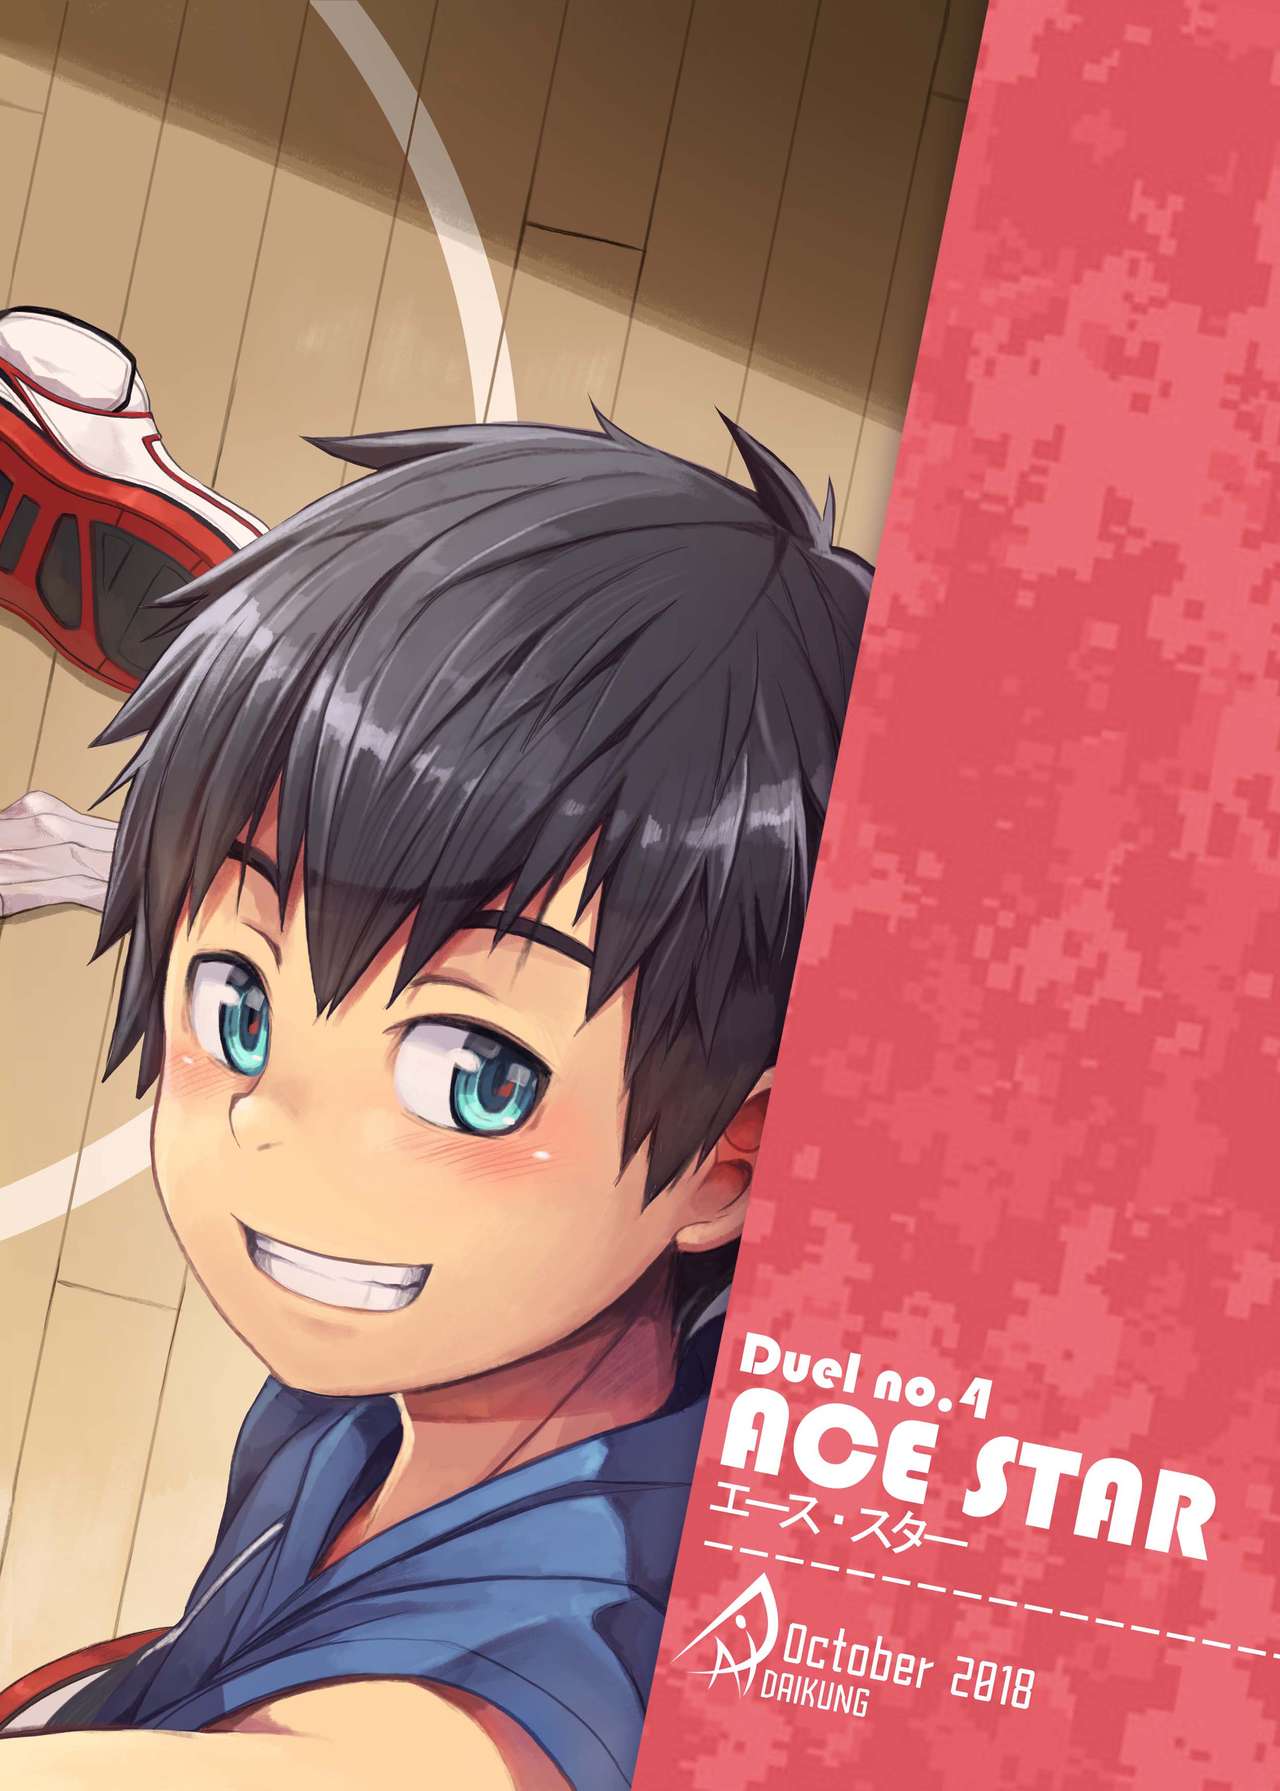 [Beater (daikung)] Ace Star [Uncensored] [Digital] page 37 full